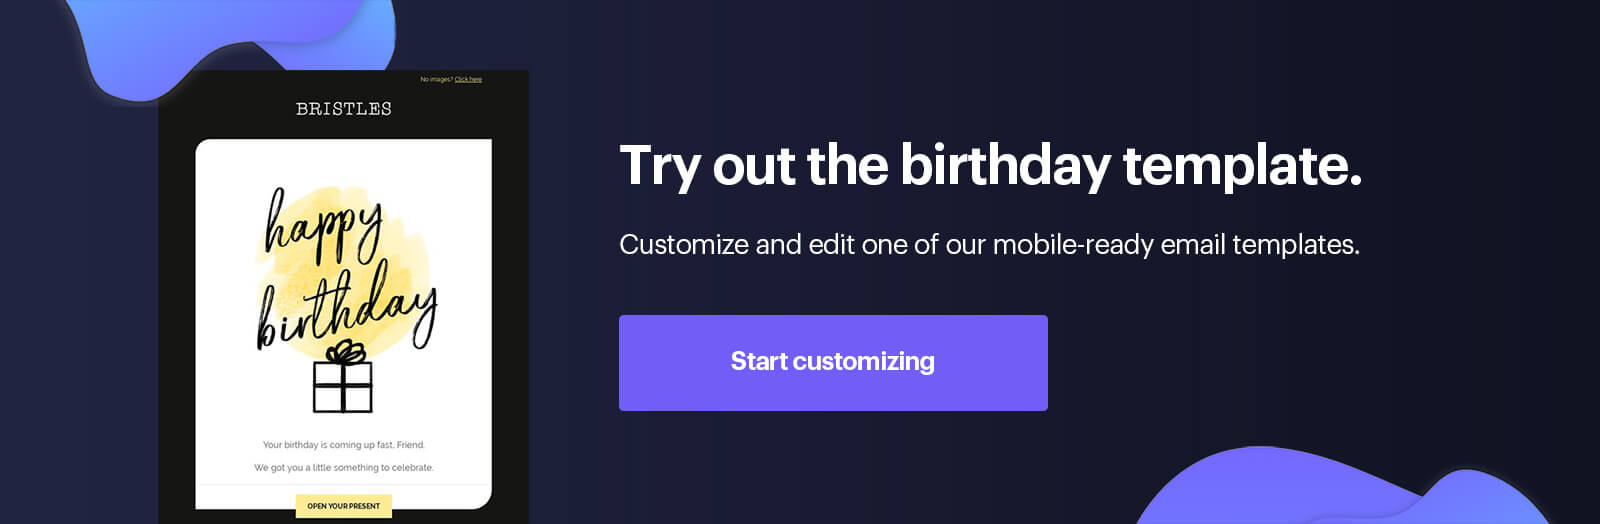 birthday email template